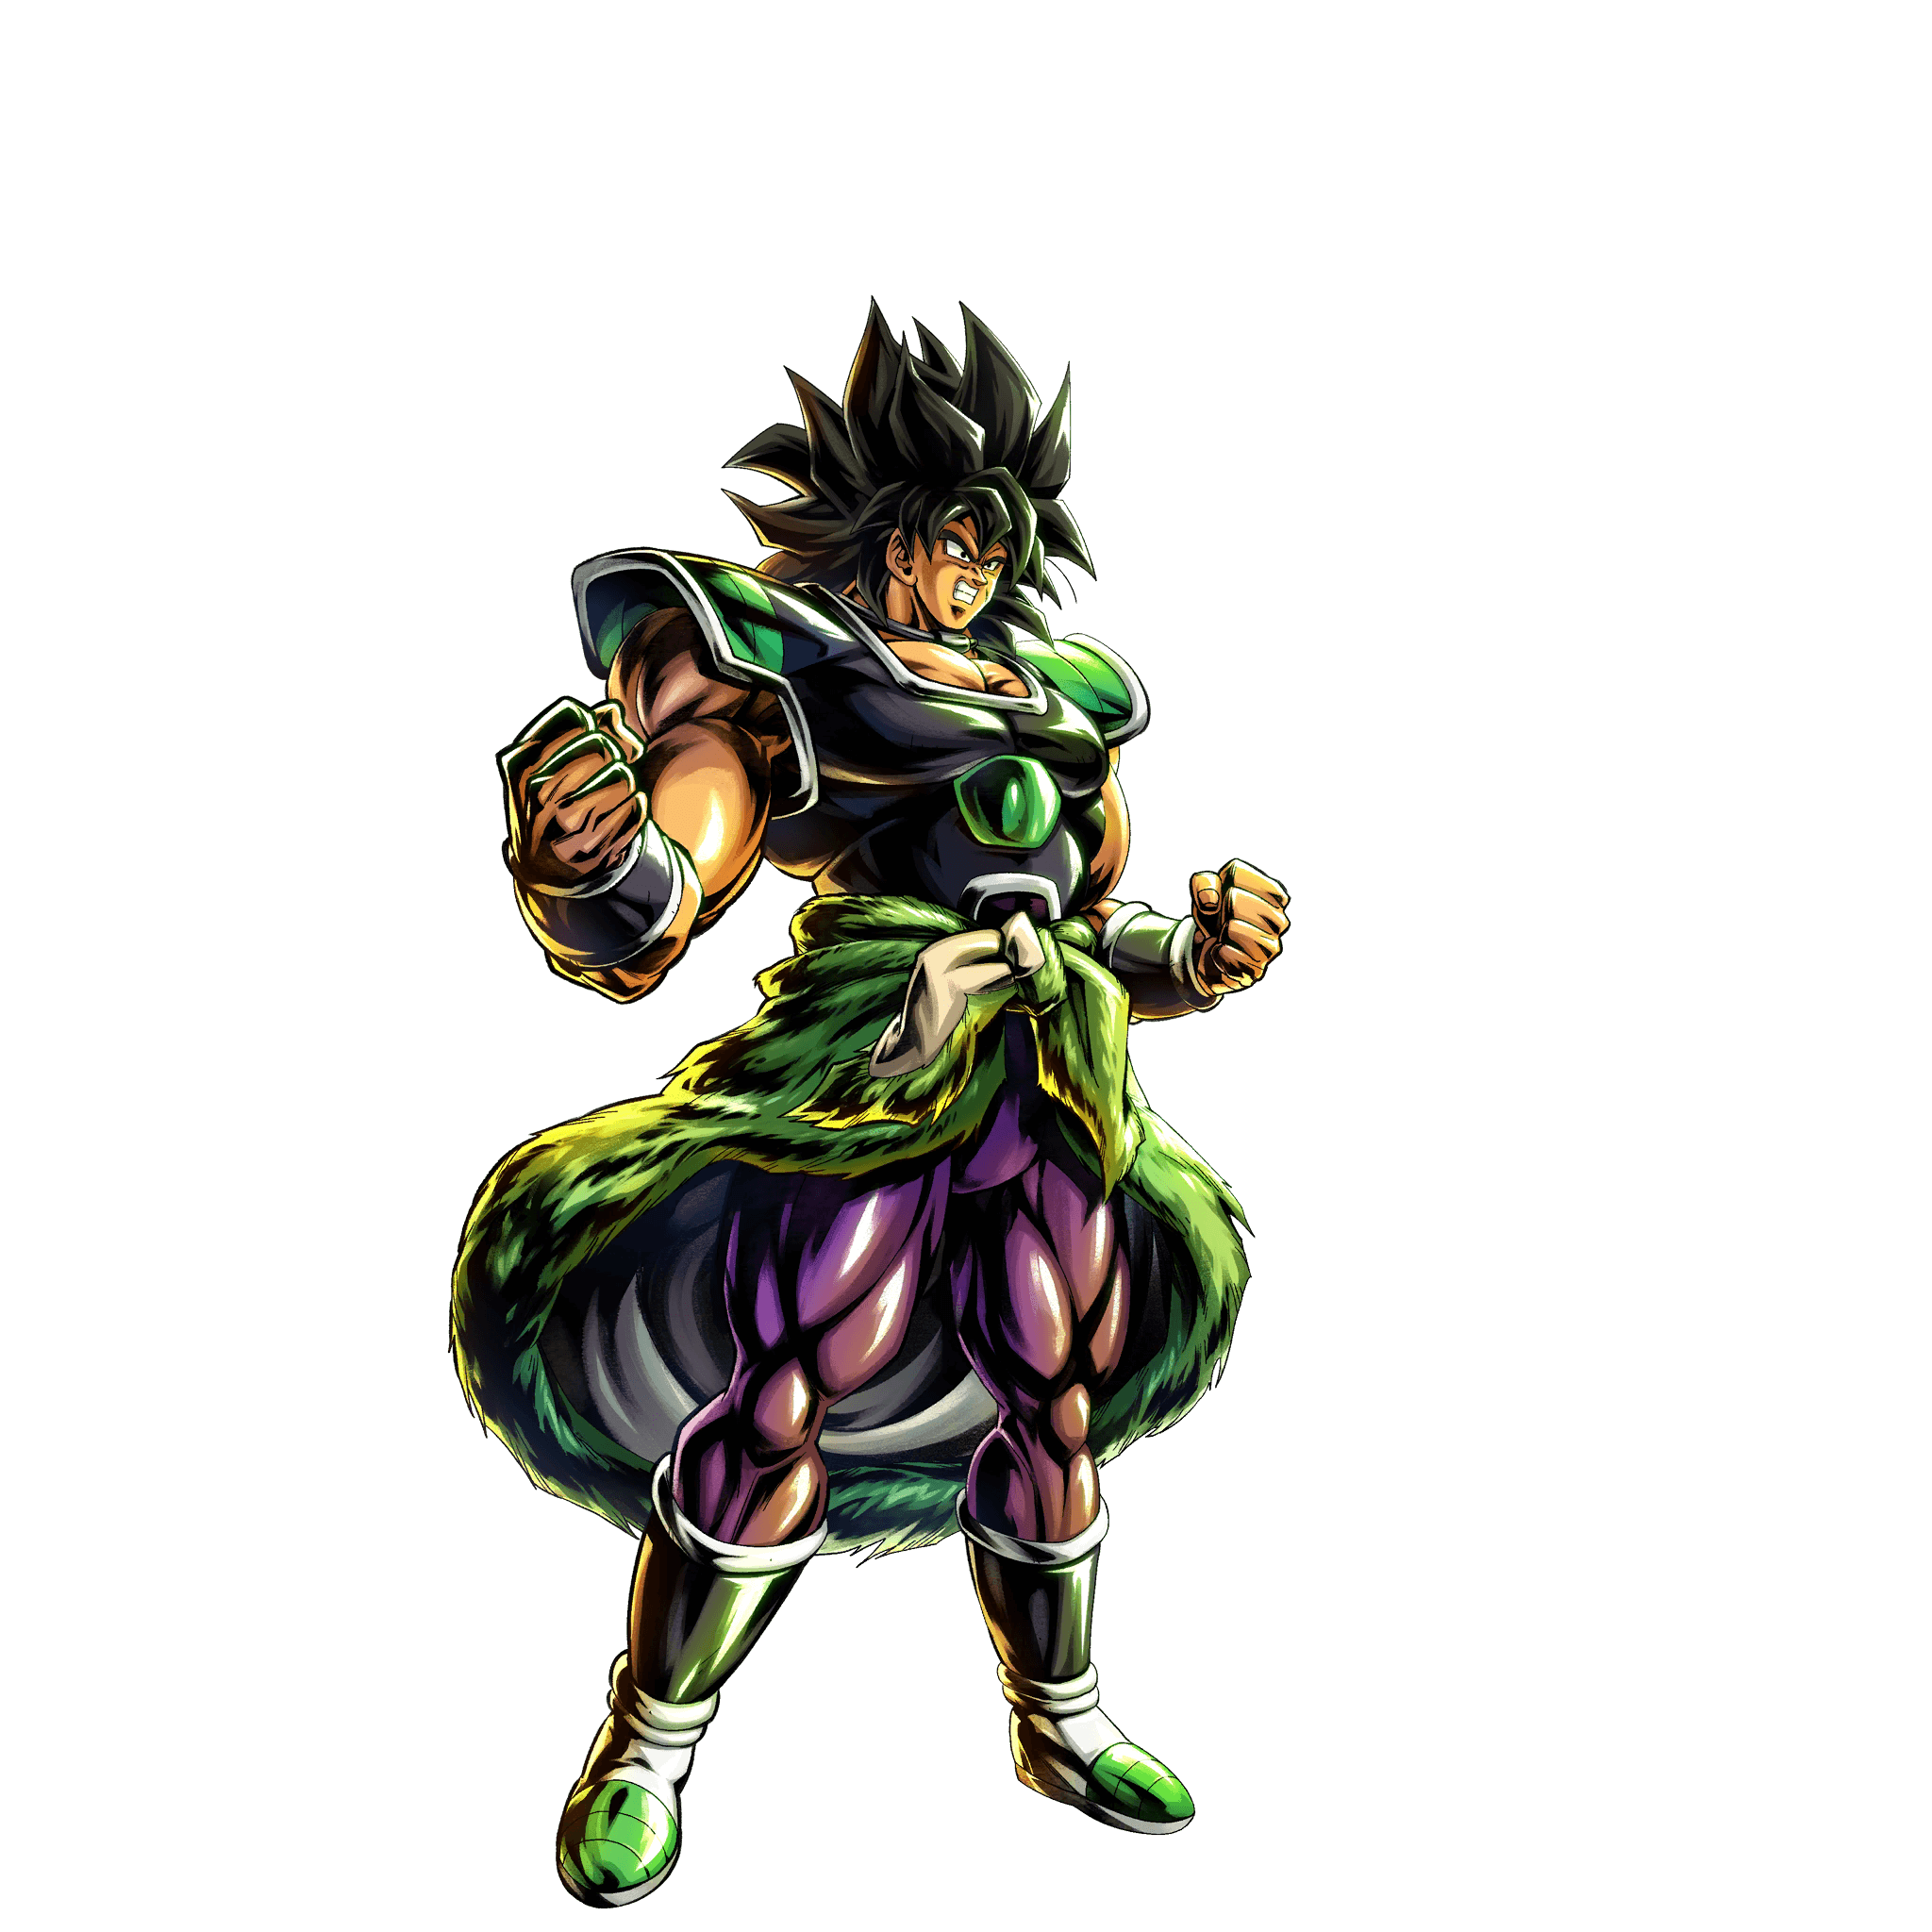 SP Android #16 (Green)  Dragon Ball Legends Wiki - GamePress